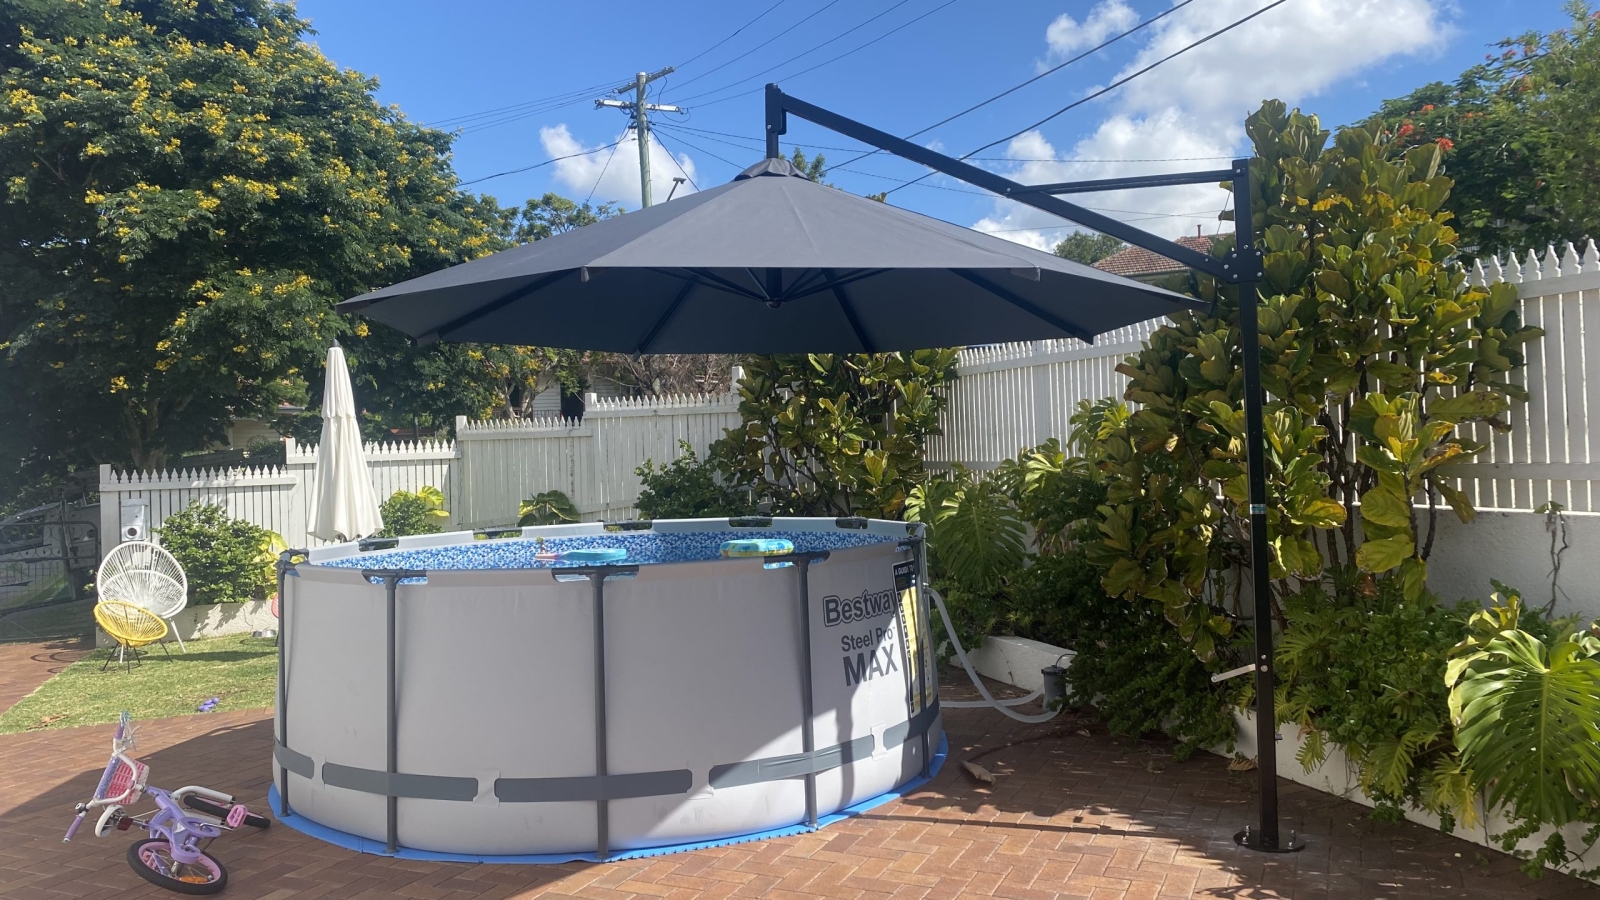 The Benefits of Installing A Giant Umbrella In Your Backyard